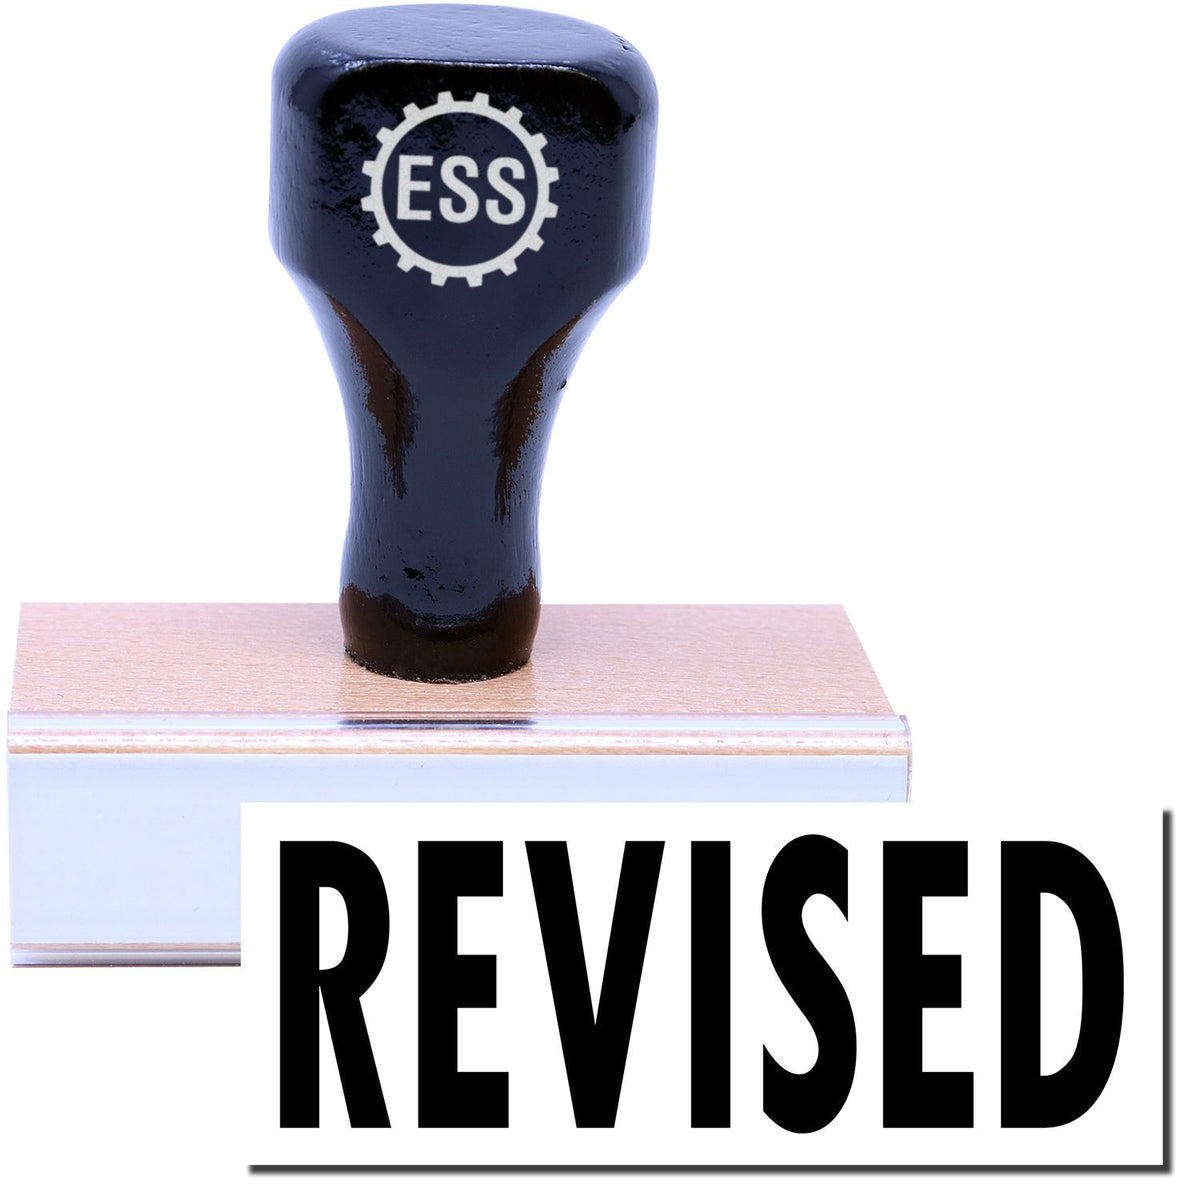 A stock office rubber stamp with a stamped image showing how the text &quot;REVISED&quot; in a large bold font is displayed after stamping.